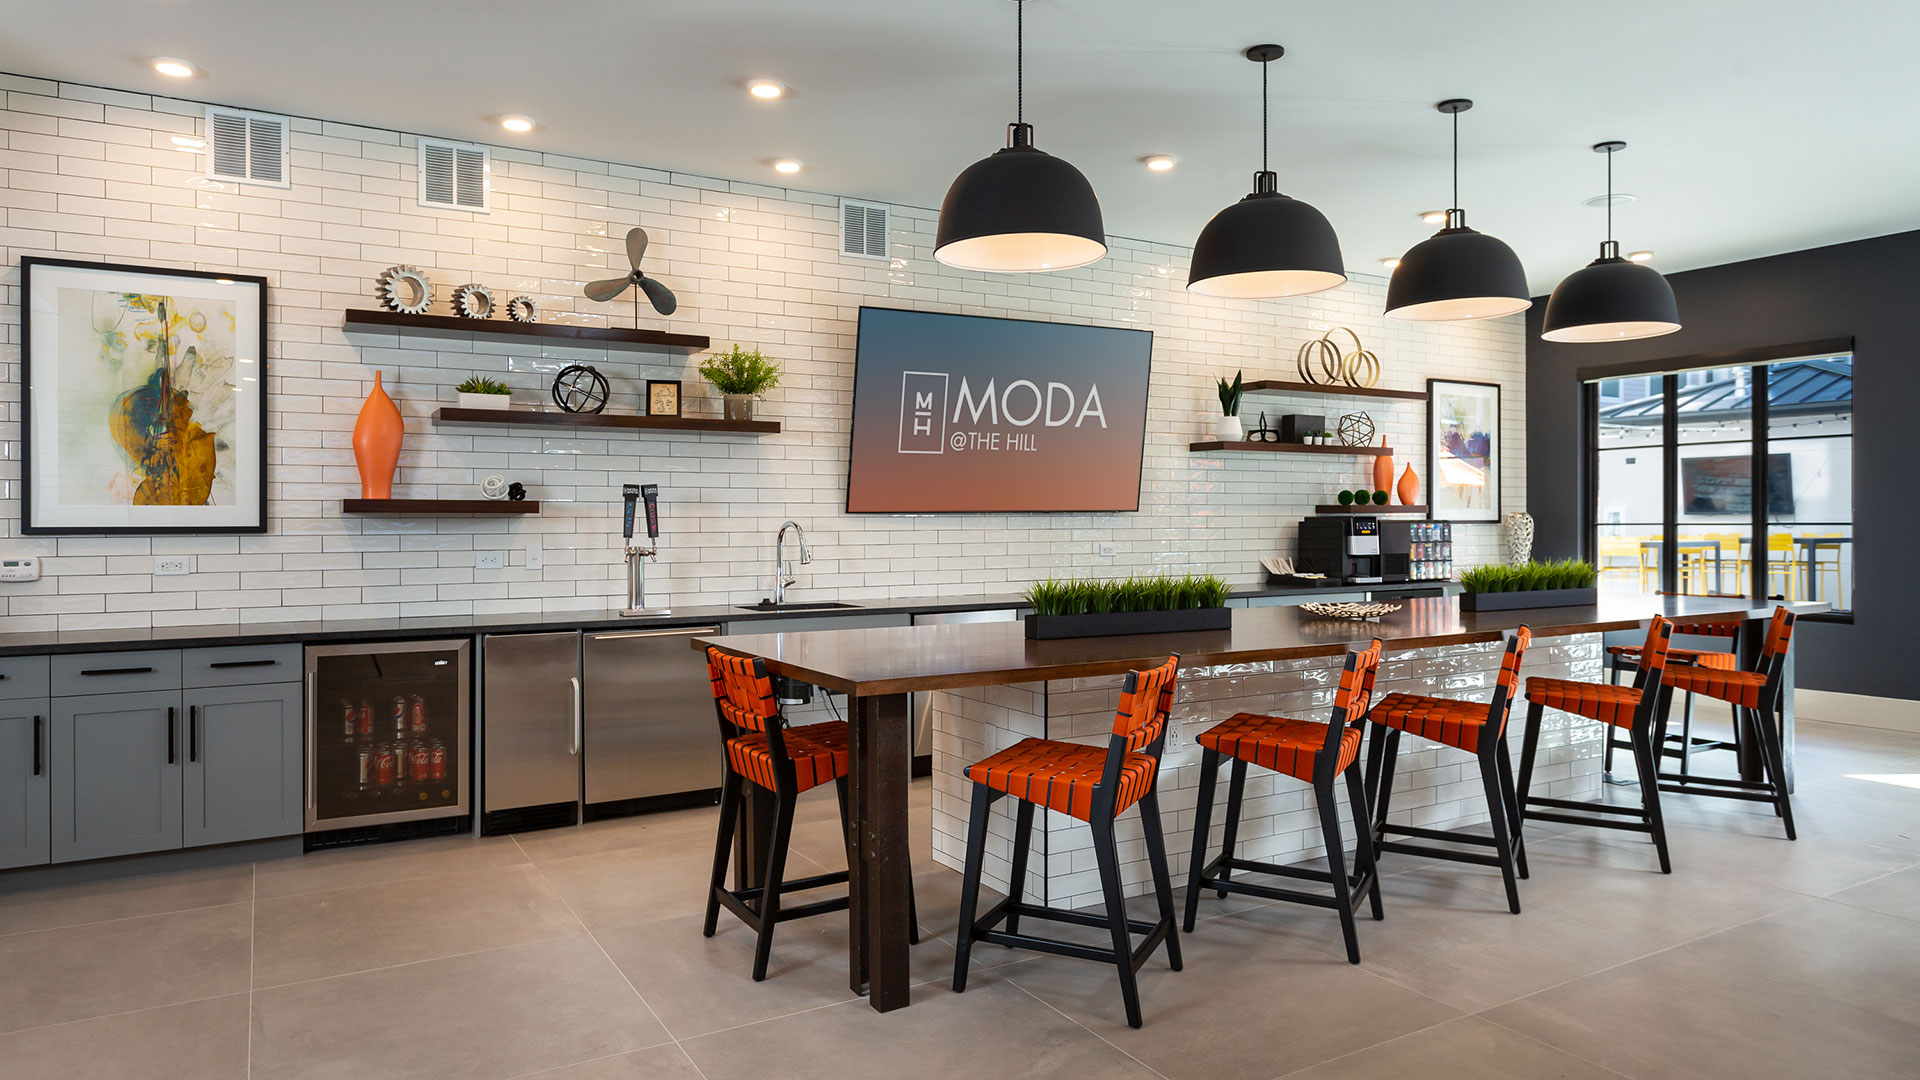 The catering kitchen at Moda at The Hill. A large bar sits in front of the kitchen that runs along the back wall. There are shelves with knick-knacks on them and a large screen television.